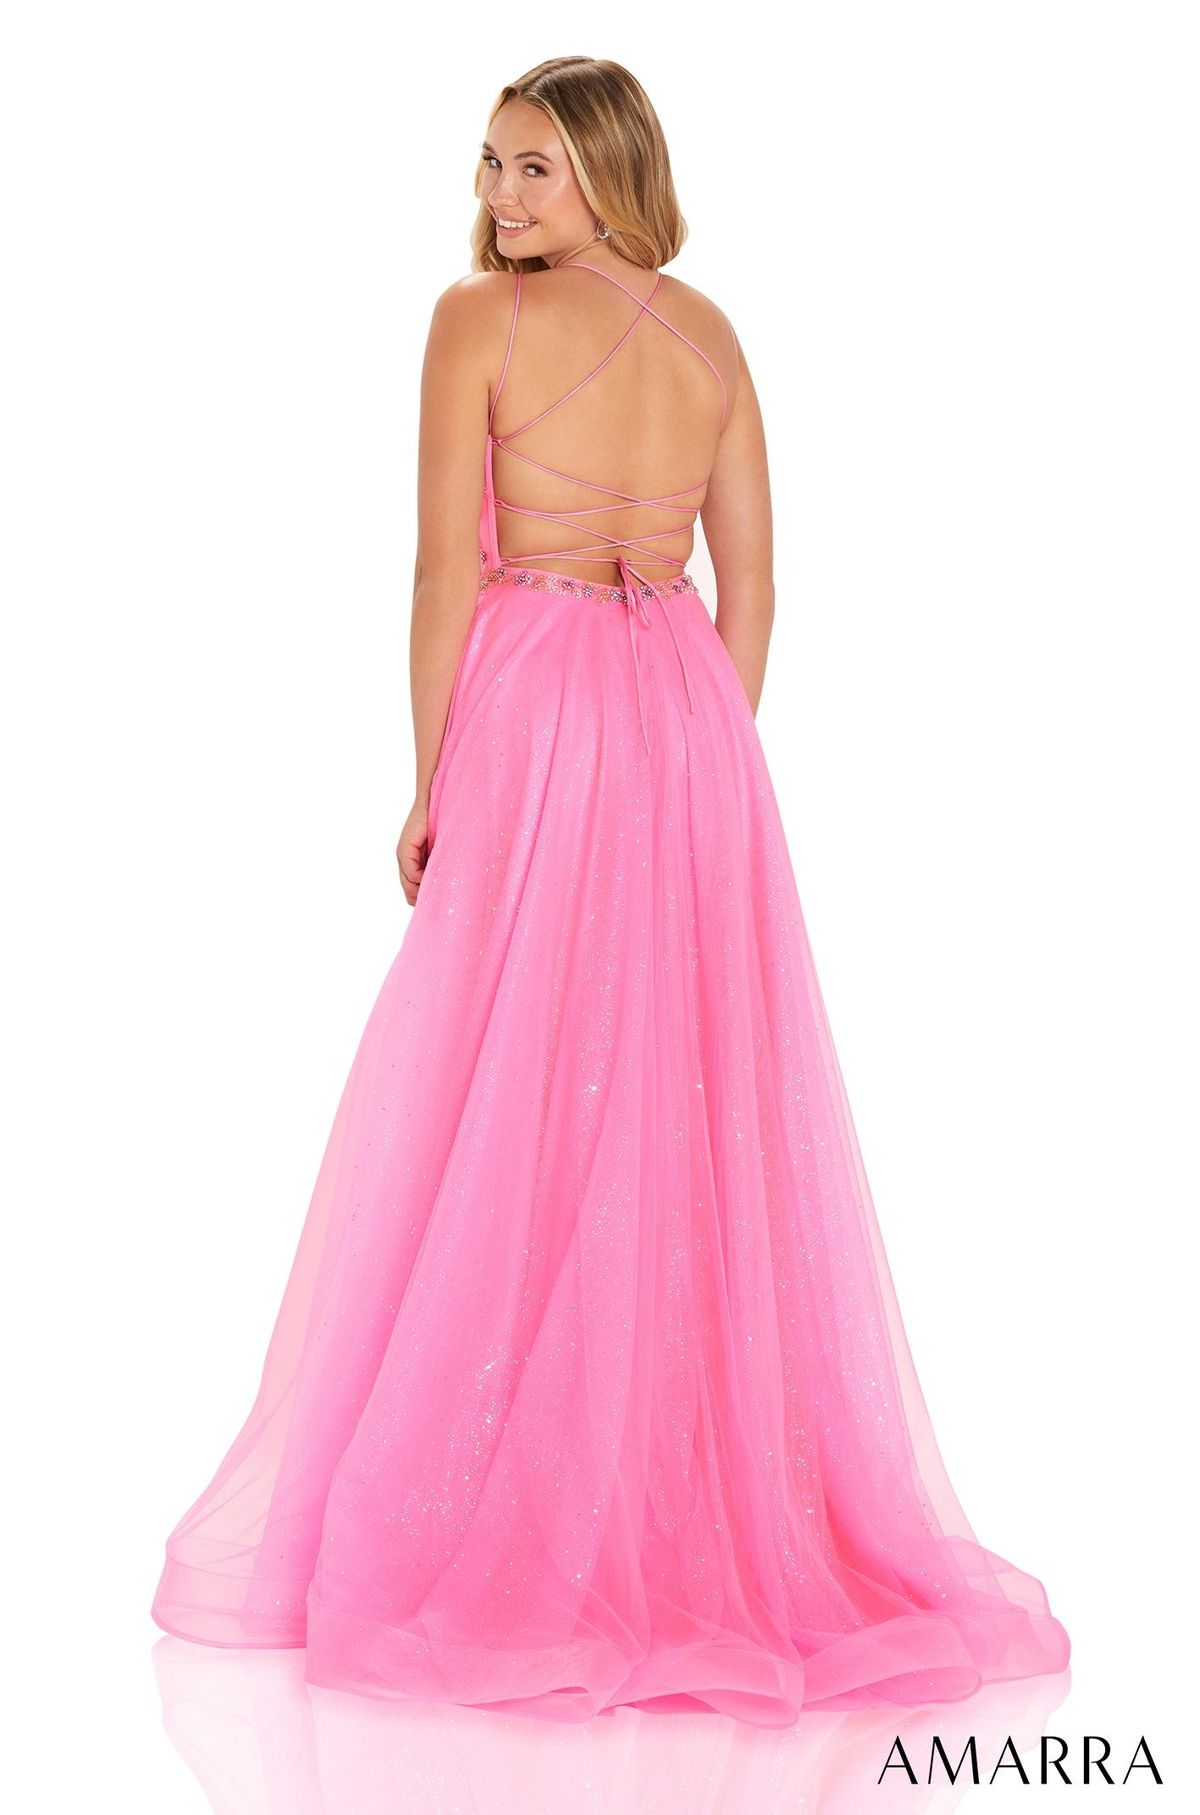 Style ALIZA_HOTPINK6_35C5E Amarra Size 6 Prom Sequined Light Pink Ball Gown on Queenly